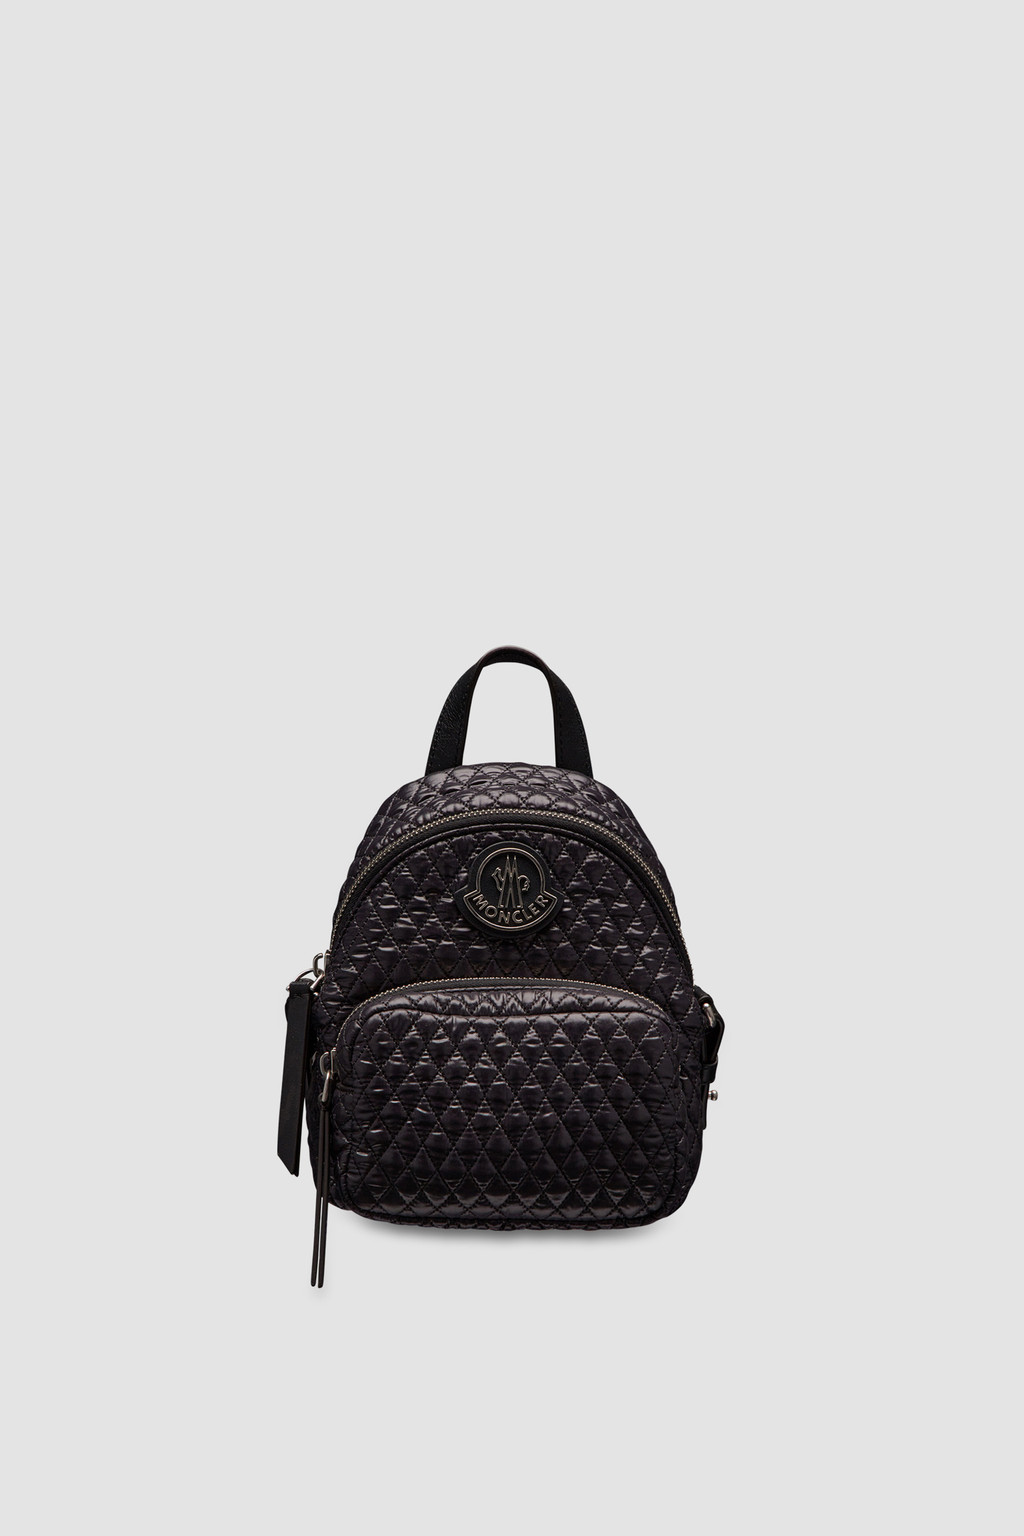 Bags & Small Accessories for Women - Accessories | Moncler HK